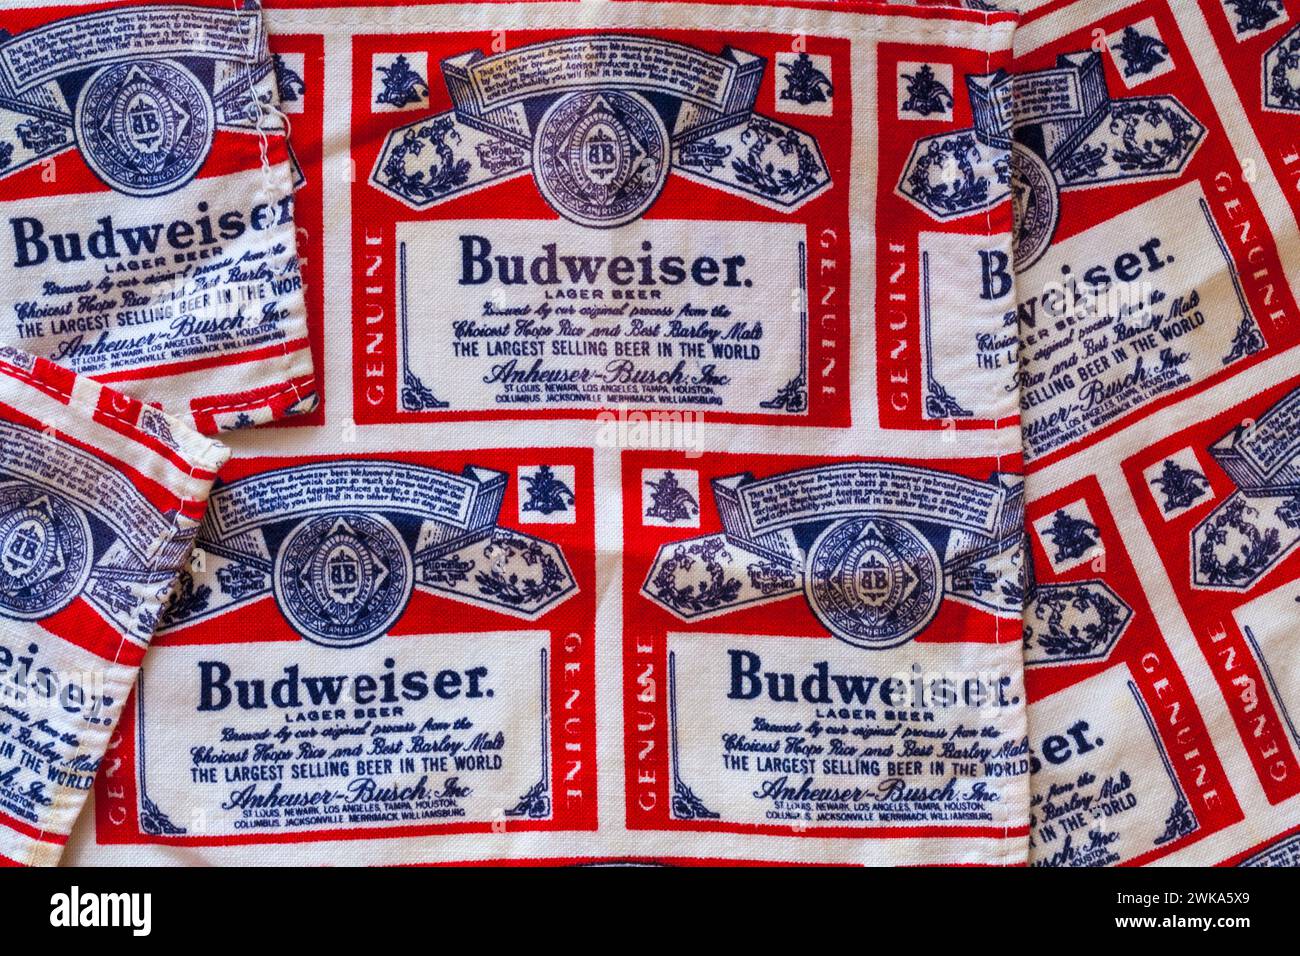 Budweiser lager beer logo fabric material Stock Photo